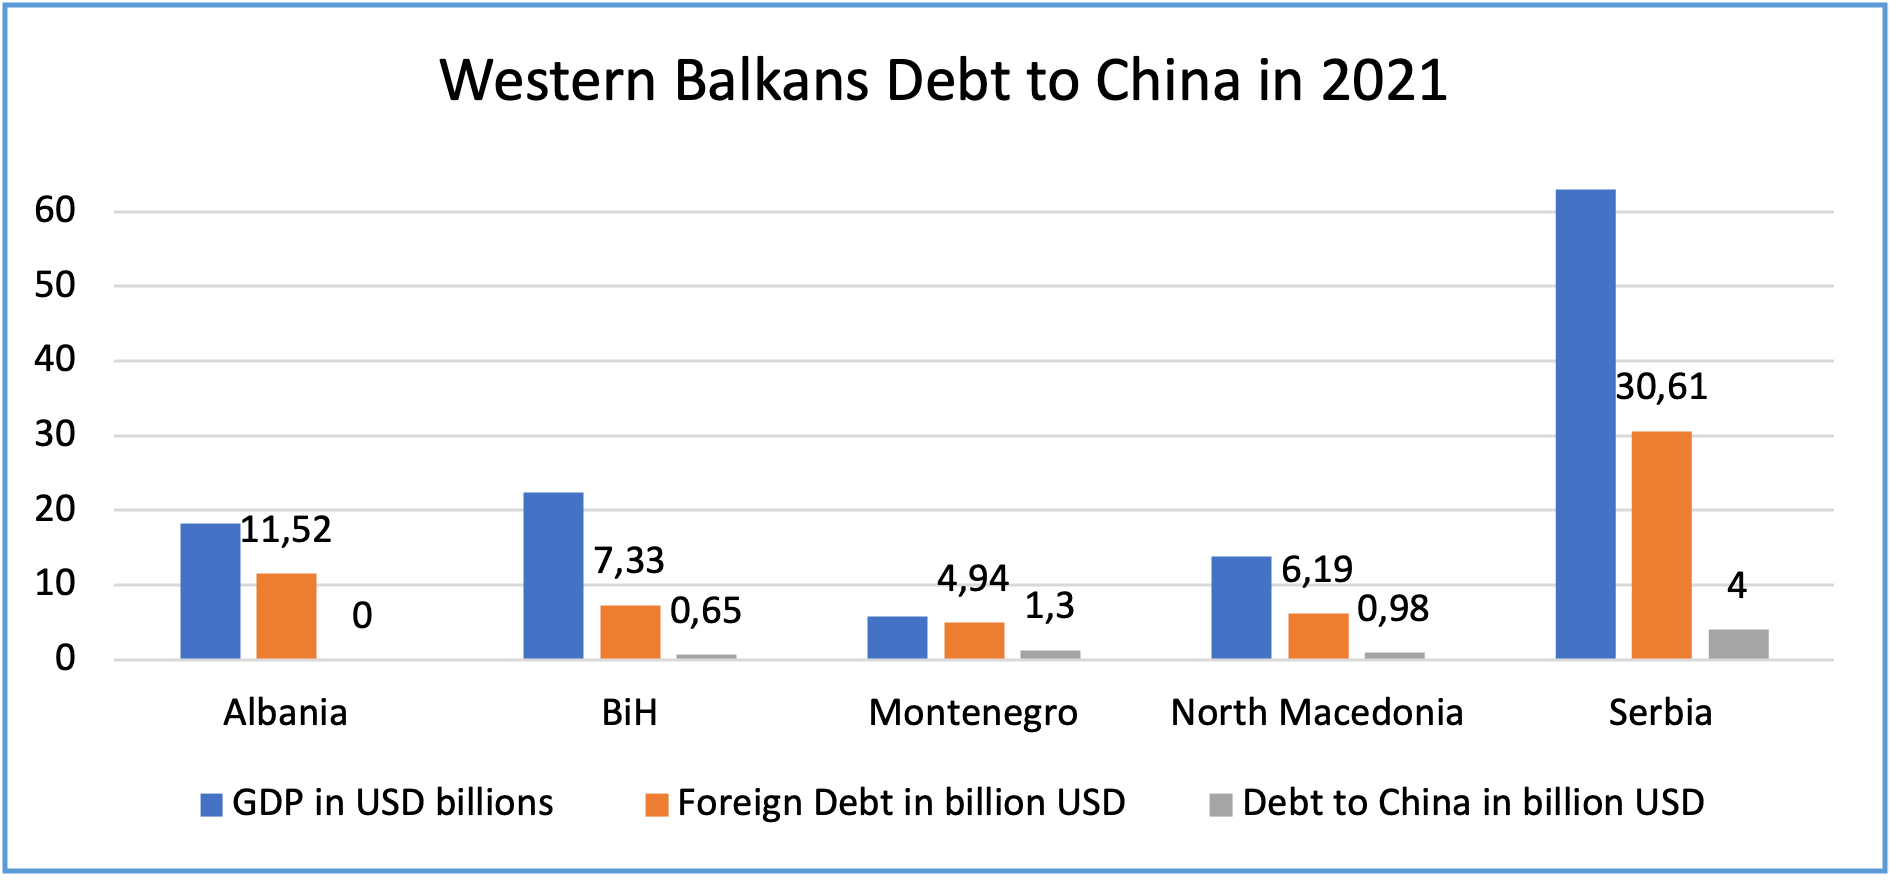 Western Balkans Debt to China compared to Foreign Debt and GDP 